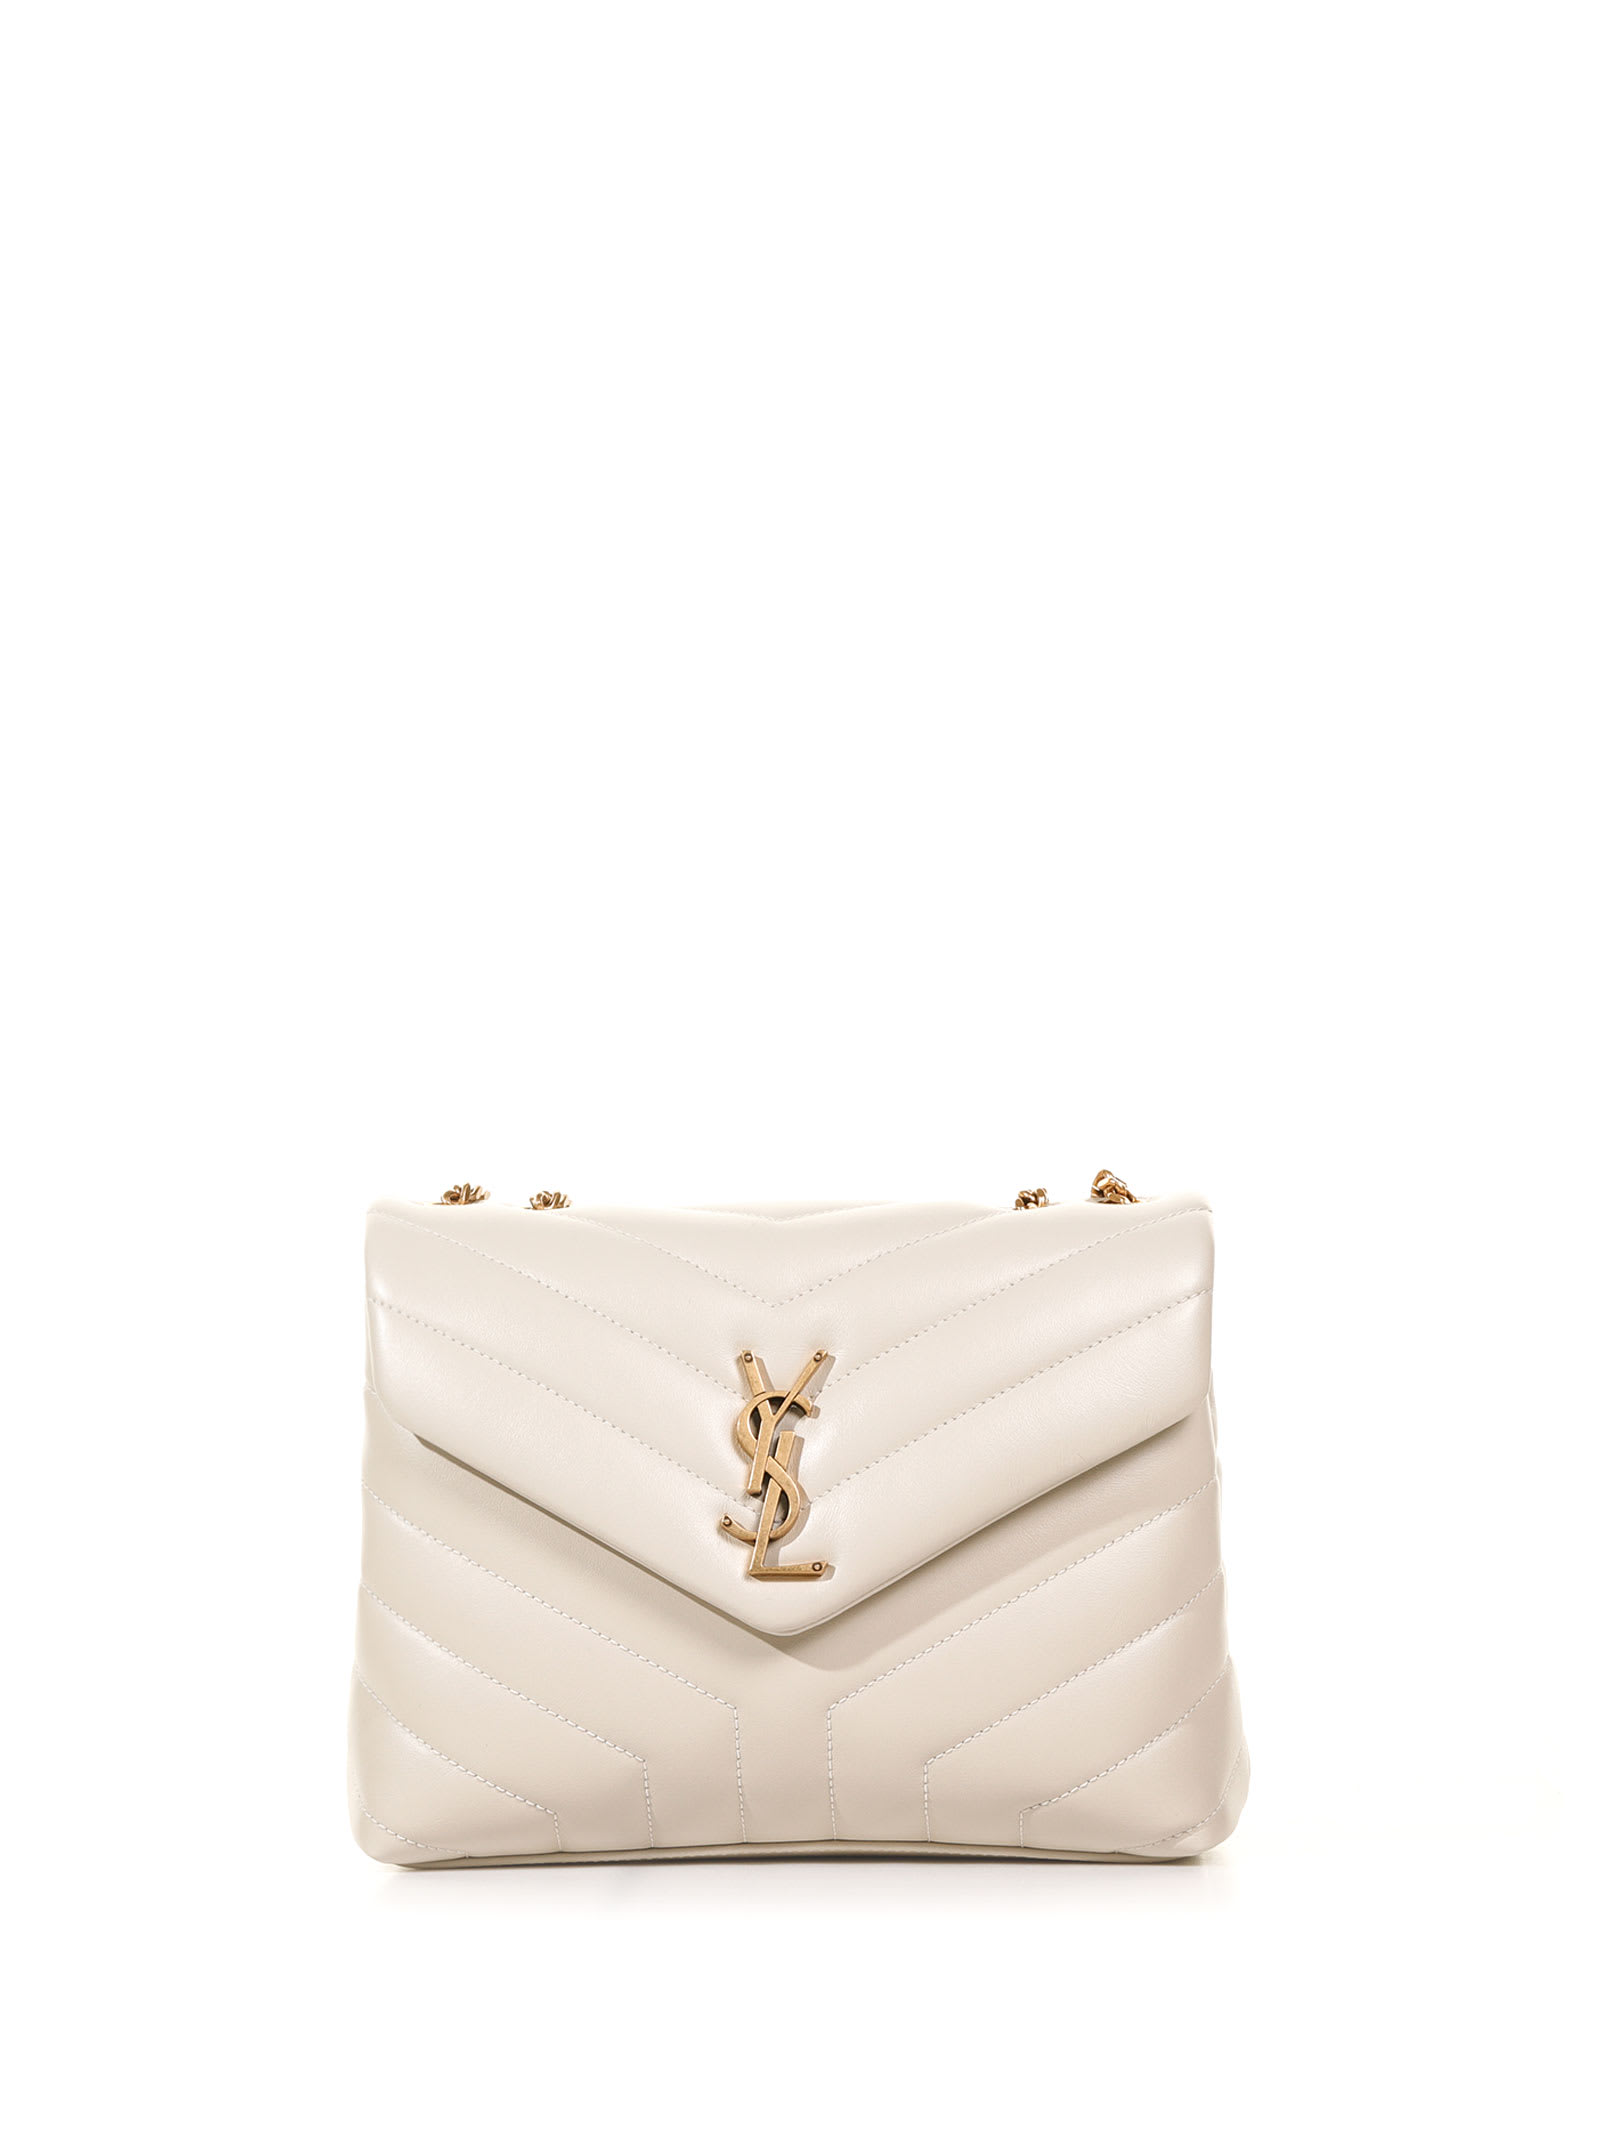 Saint Laurent Loulou Small Quilted Leather Shoulder Bag In Crema Soft